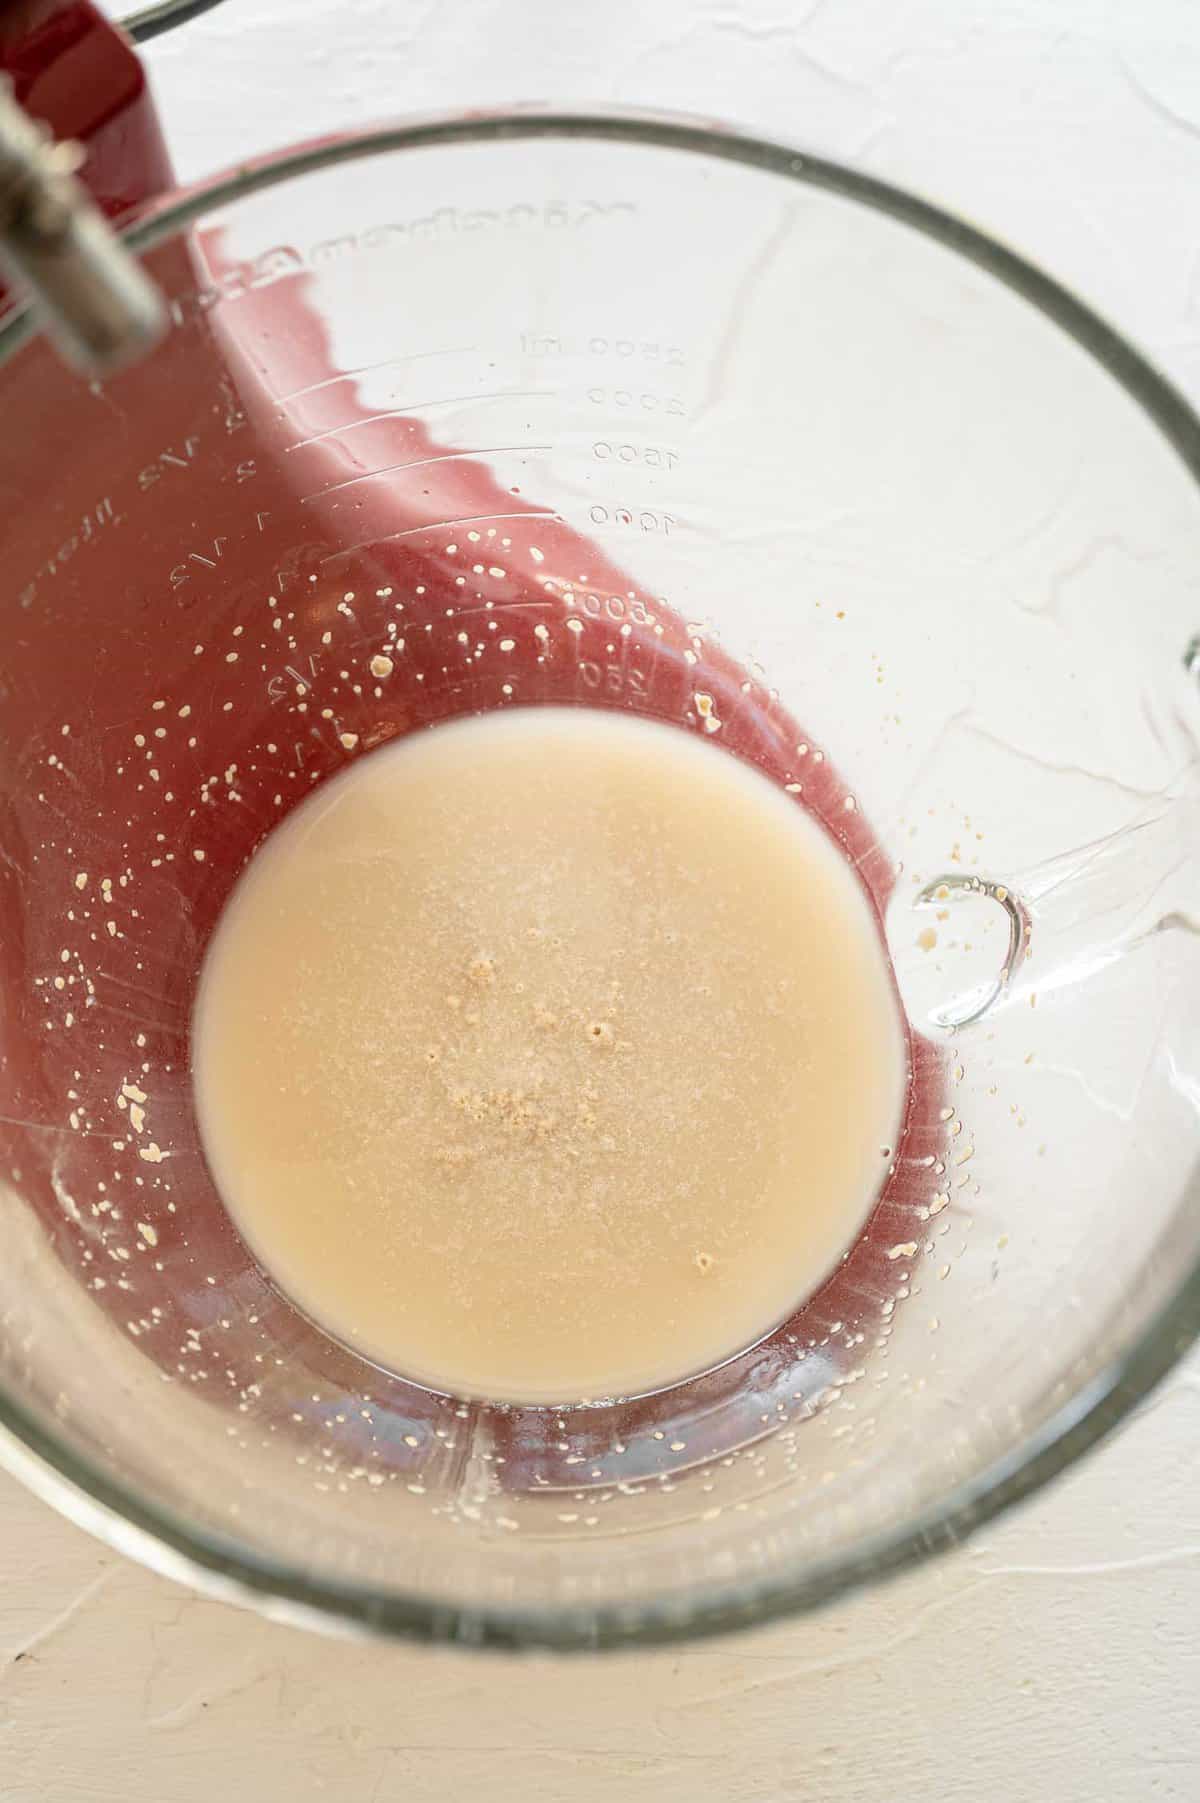 yeast, water, and sugar in a stand mixer